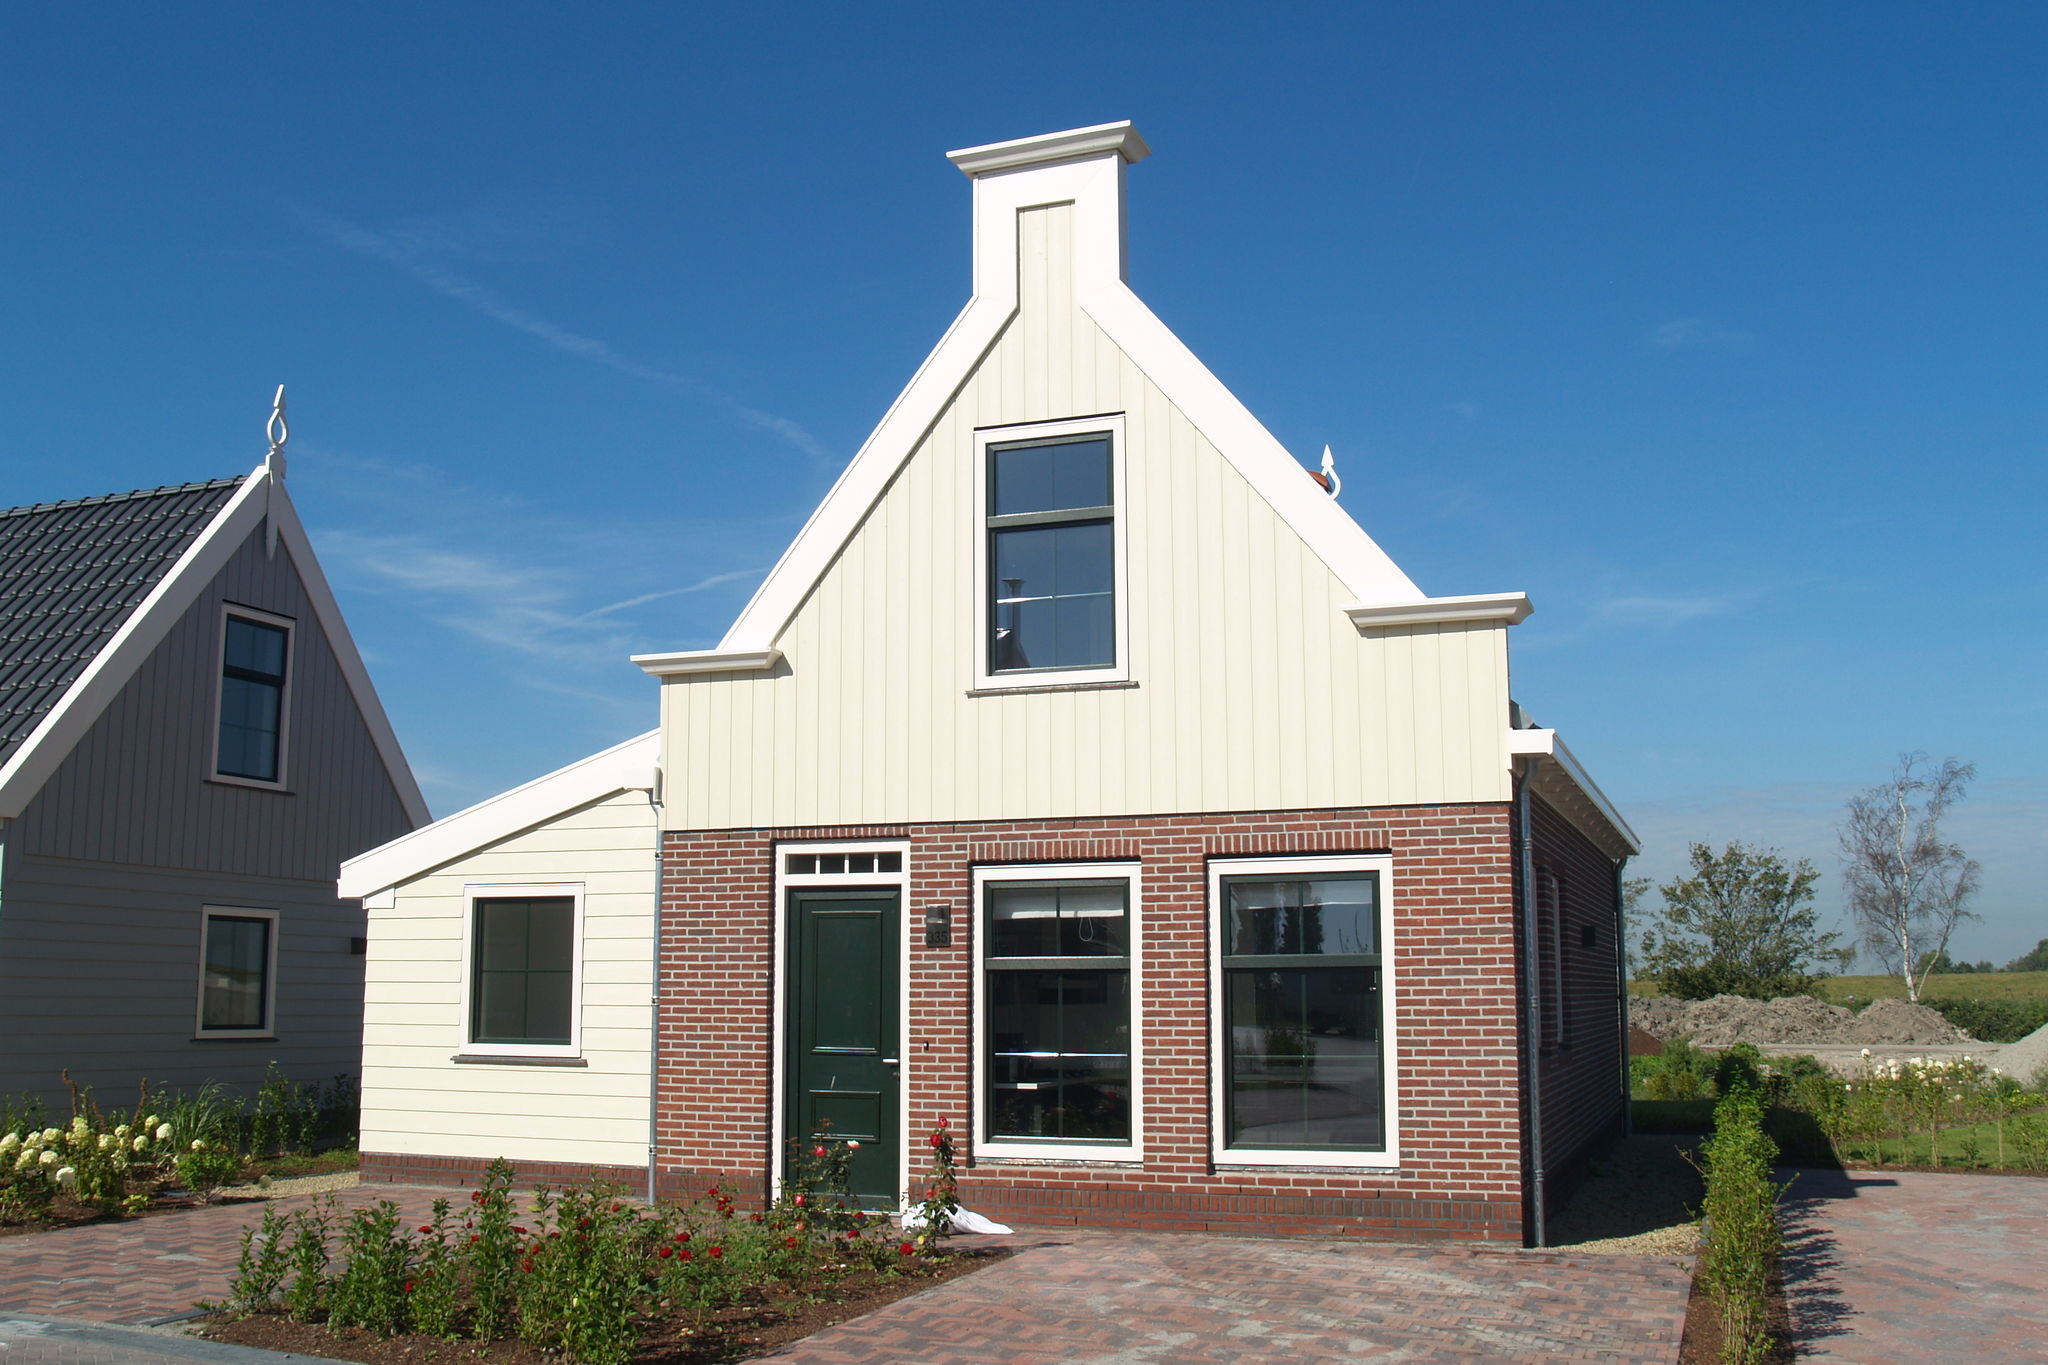 Holiday home on the Markermeer, near Amsterdam